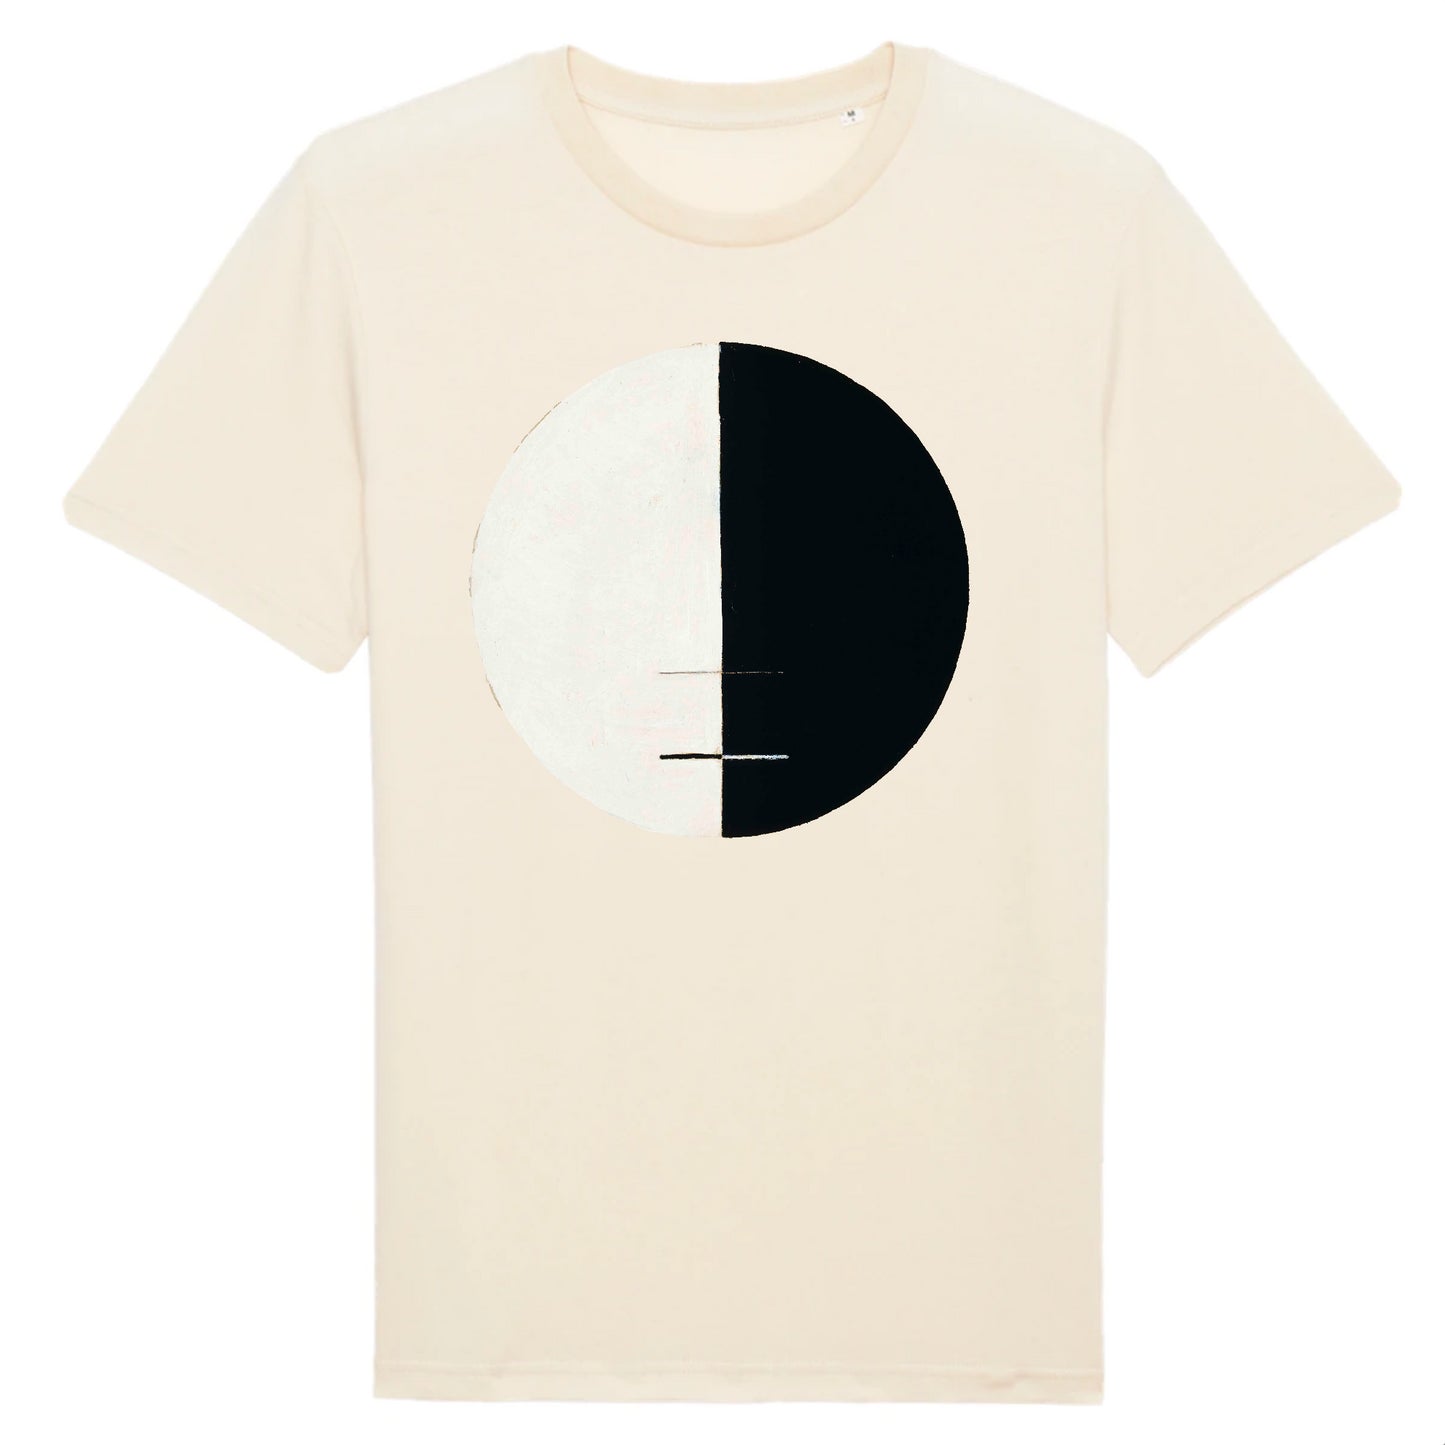 Buddha's Standpoint in the Earthly Life, No. 3a by Hilma af Klint, 1920 - Organic Cotton T-Shirt